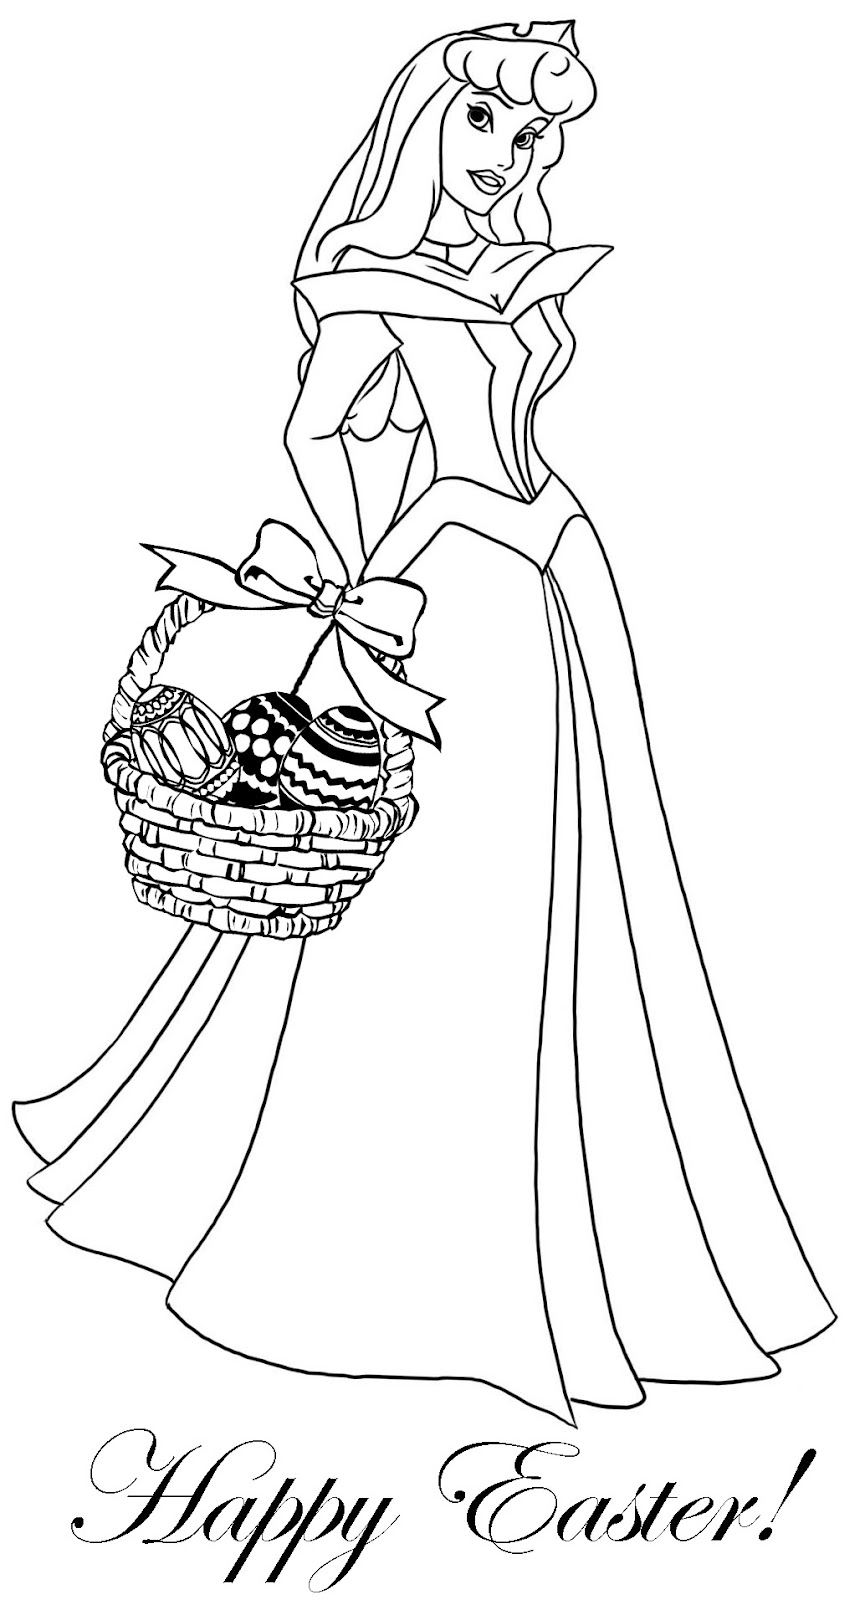 EASTER PRINCESS COLORING PICTURE